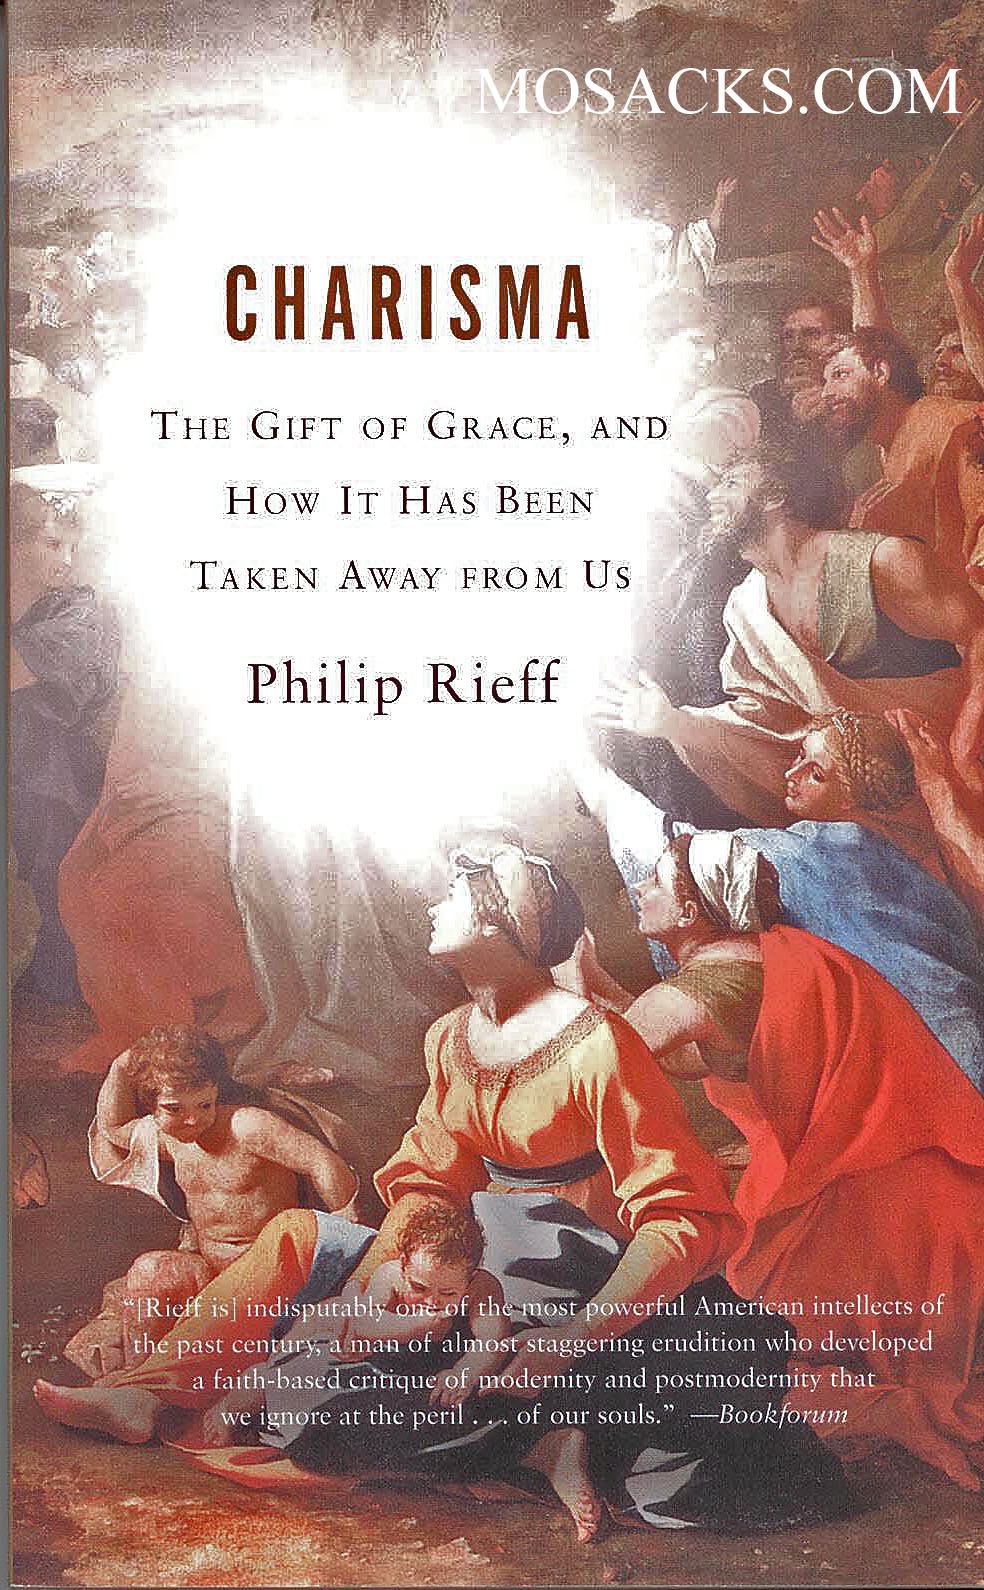 Charisma: The Gift of Grace by Philip Rieff